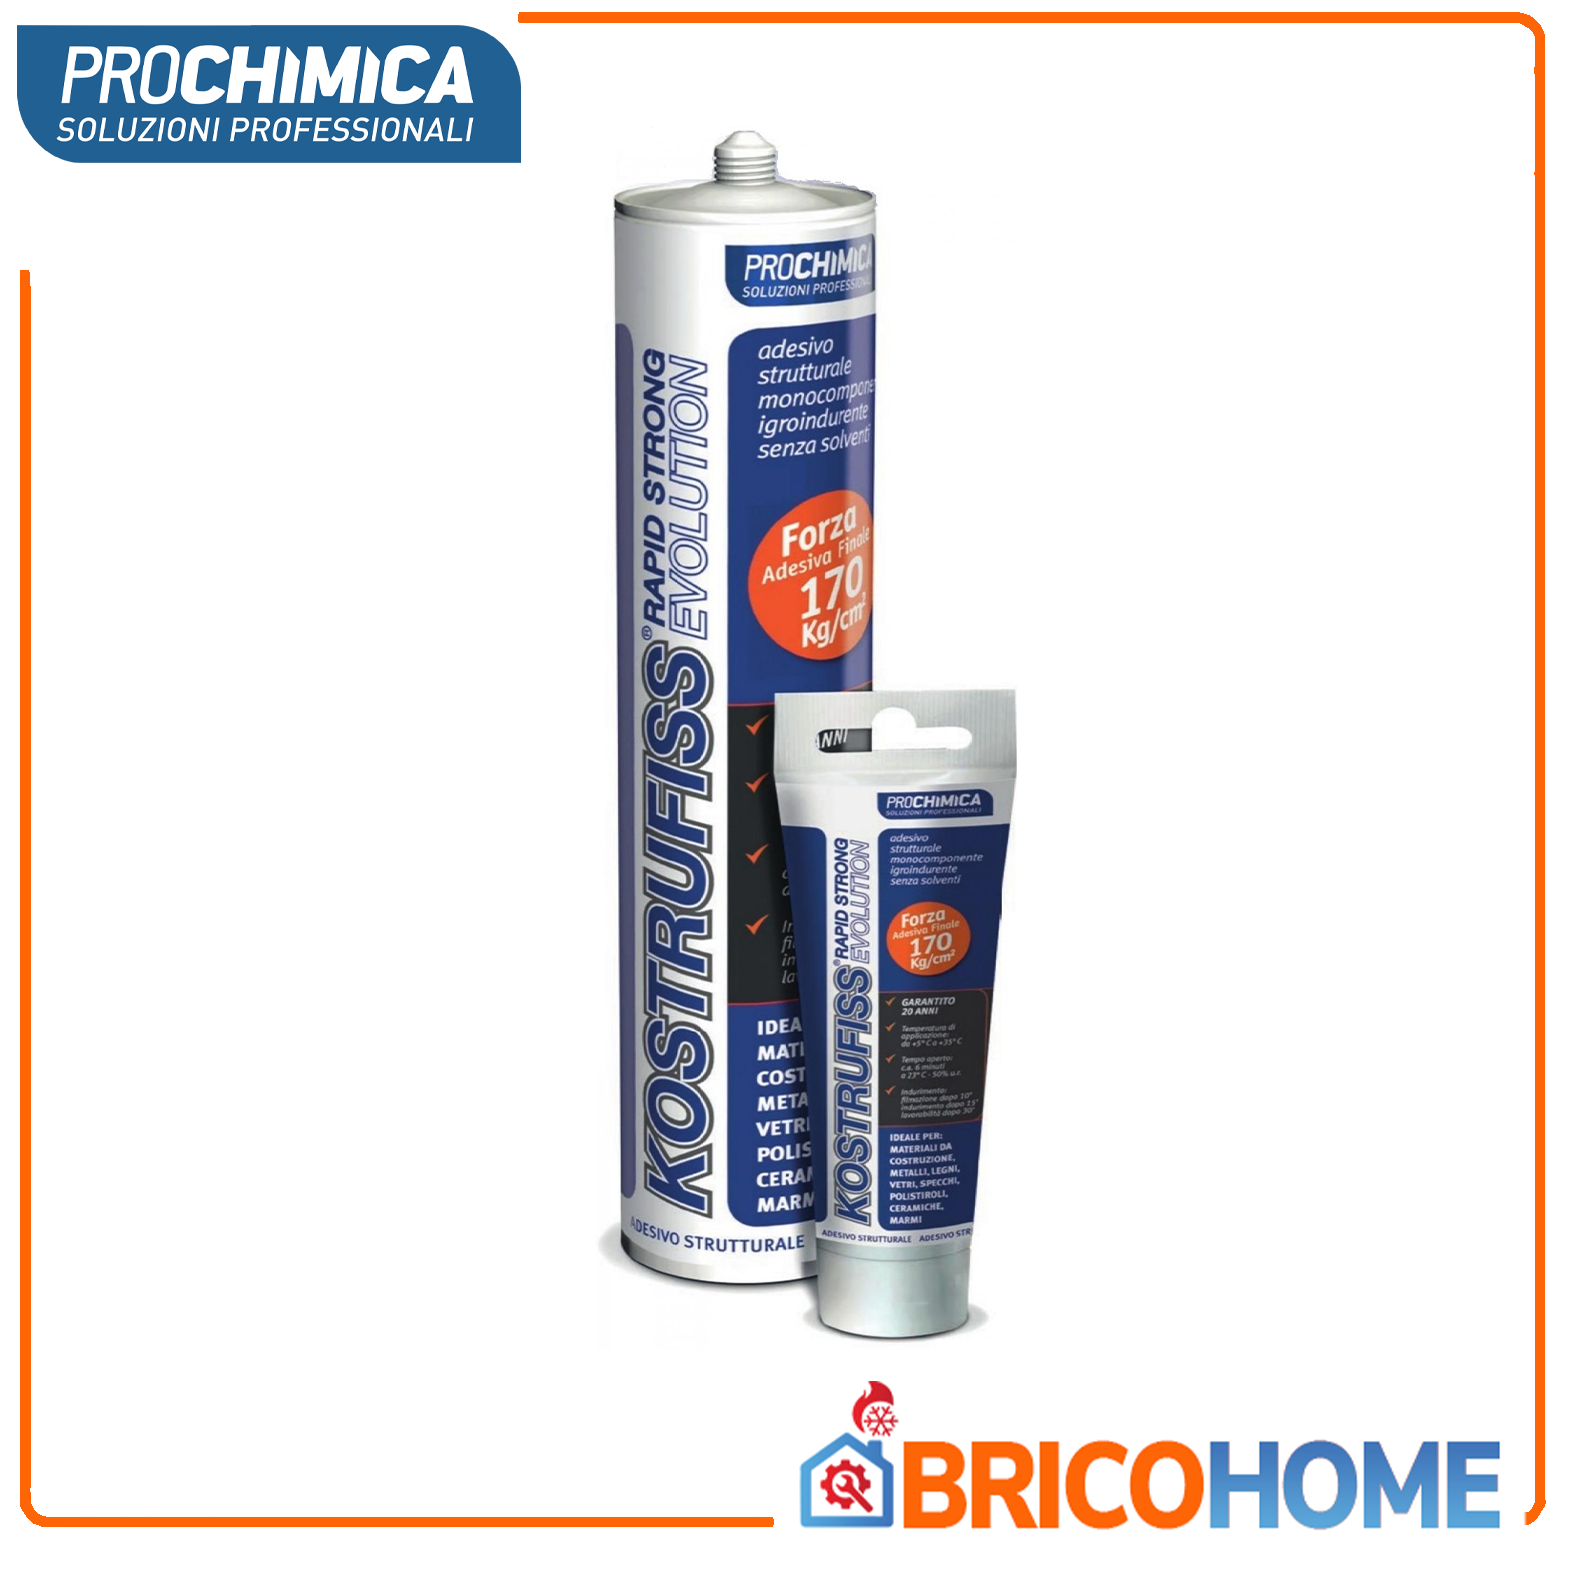 KOSTRUFISS ultra strong quick-setting structural glue adhesive - 80ml.